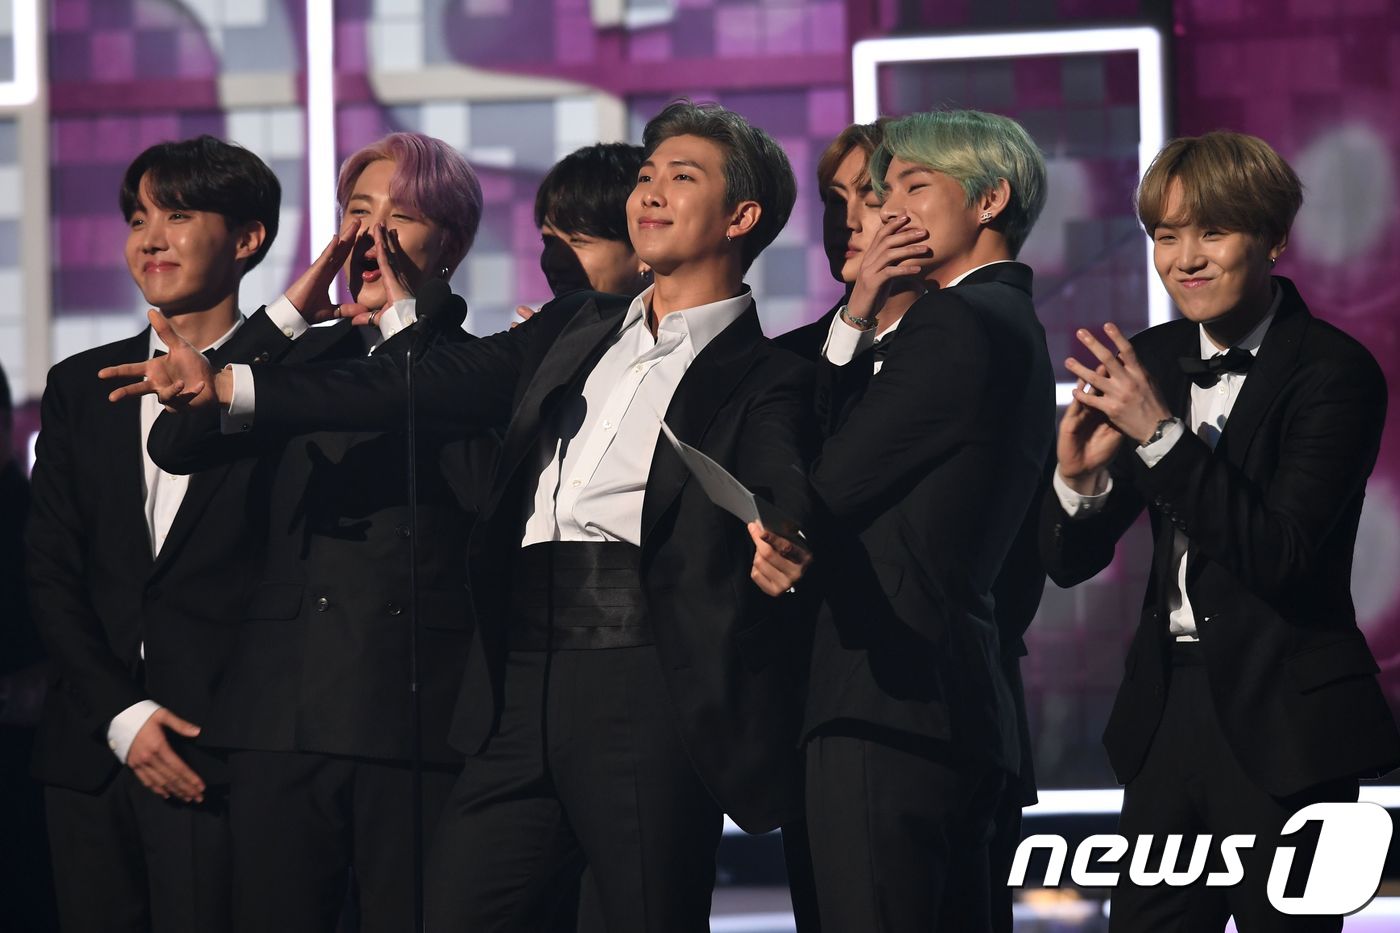 The 61st Grammy Awards (2019 Grammy Awards) were held at the Staples Center in Los Angeles, Los Angeles, at 10 a.m. on the 11th (Korea time).BTS appeared on stage to award one of the major awards, the Best R&B Album Award; before BTS appeared, the hit song Fake Love was laid out as background music.In many parts of the audience, they cheered on the appearance of BTS.RM took a microphone as a representative and said, We have dreamed of attending Grammy in Korea and dreamed of today.RM added hope, saying, I will come back to Grammy.Following this, BTS called the winner H.E.R. after the Best R & B Album Award candidate was introduced and applauded the congratulations.When the members called the winner, they shouted together and finished the prize neatly.The Grammy Awards have won a total of 84 awards, including Record Of The Year, Album Of The Year, Song Of The Year, and Best New Artist.Meanwhile, the Korean popular group BTS attended the Grammy Awards as a prize winner. This is the first time a Korean singer has won a Grammy Award.